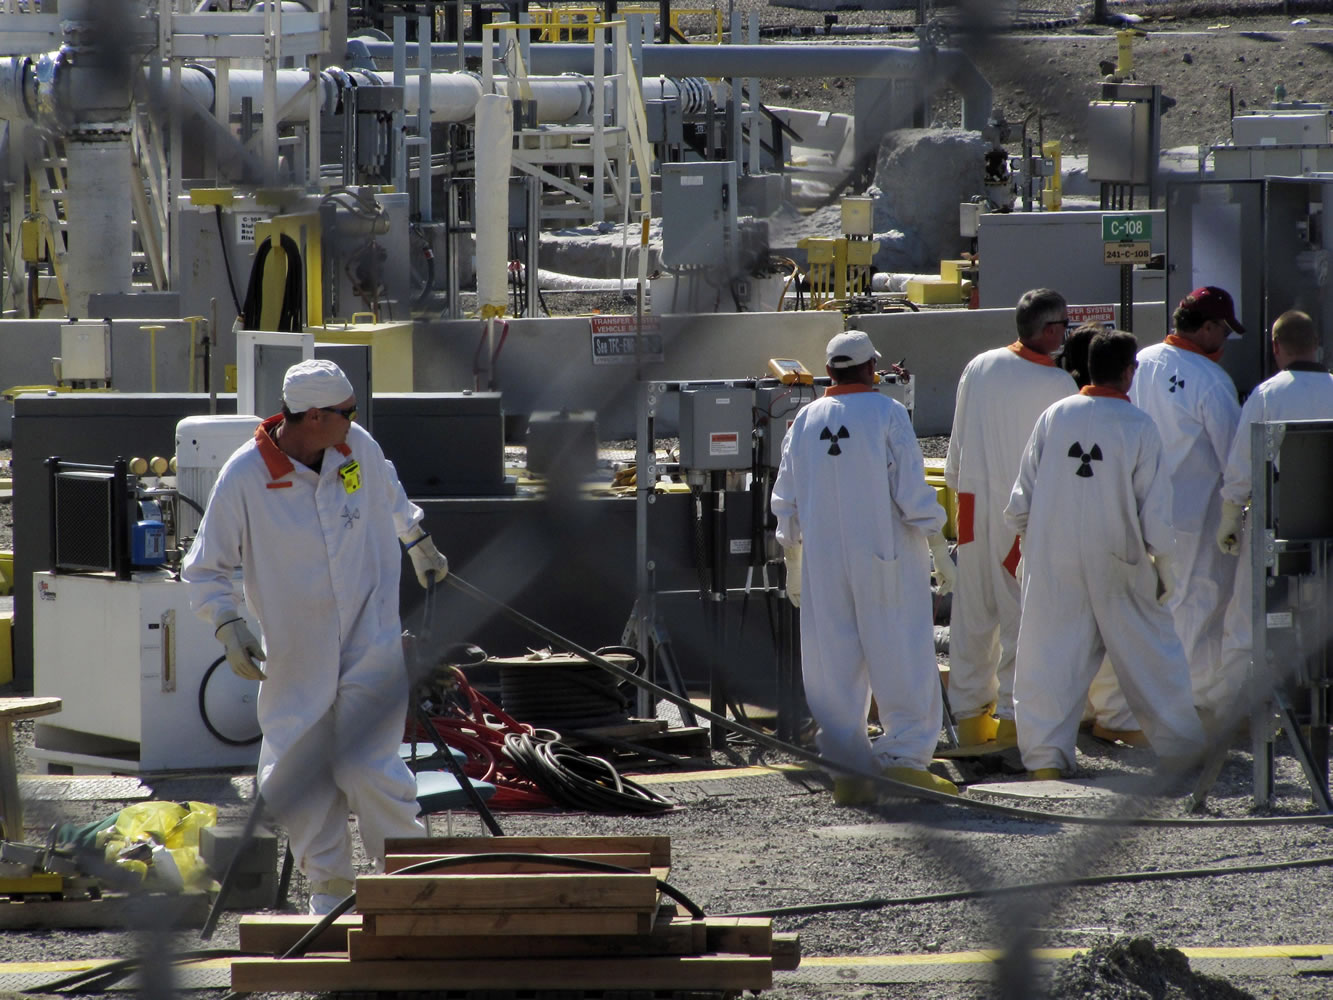 Technicians work at a Hanford nuclear reservation tank farm, where highly radioactive waste is stored underground, in July 2010.